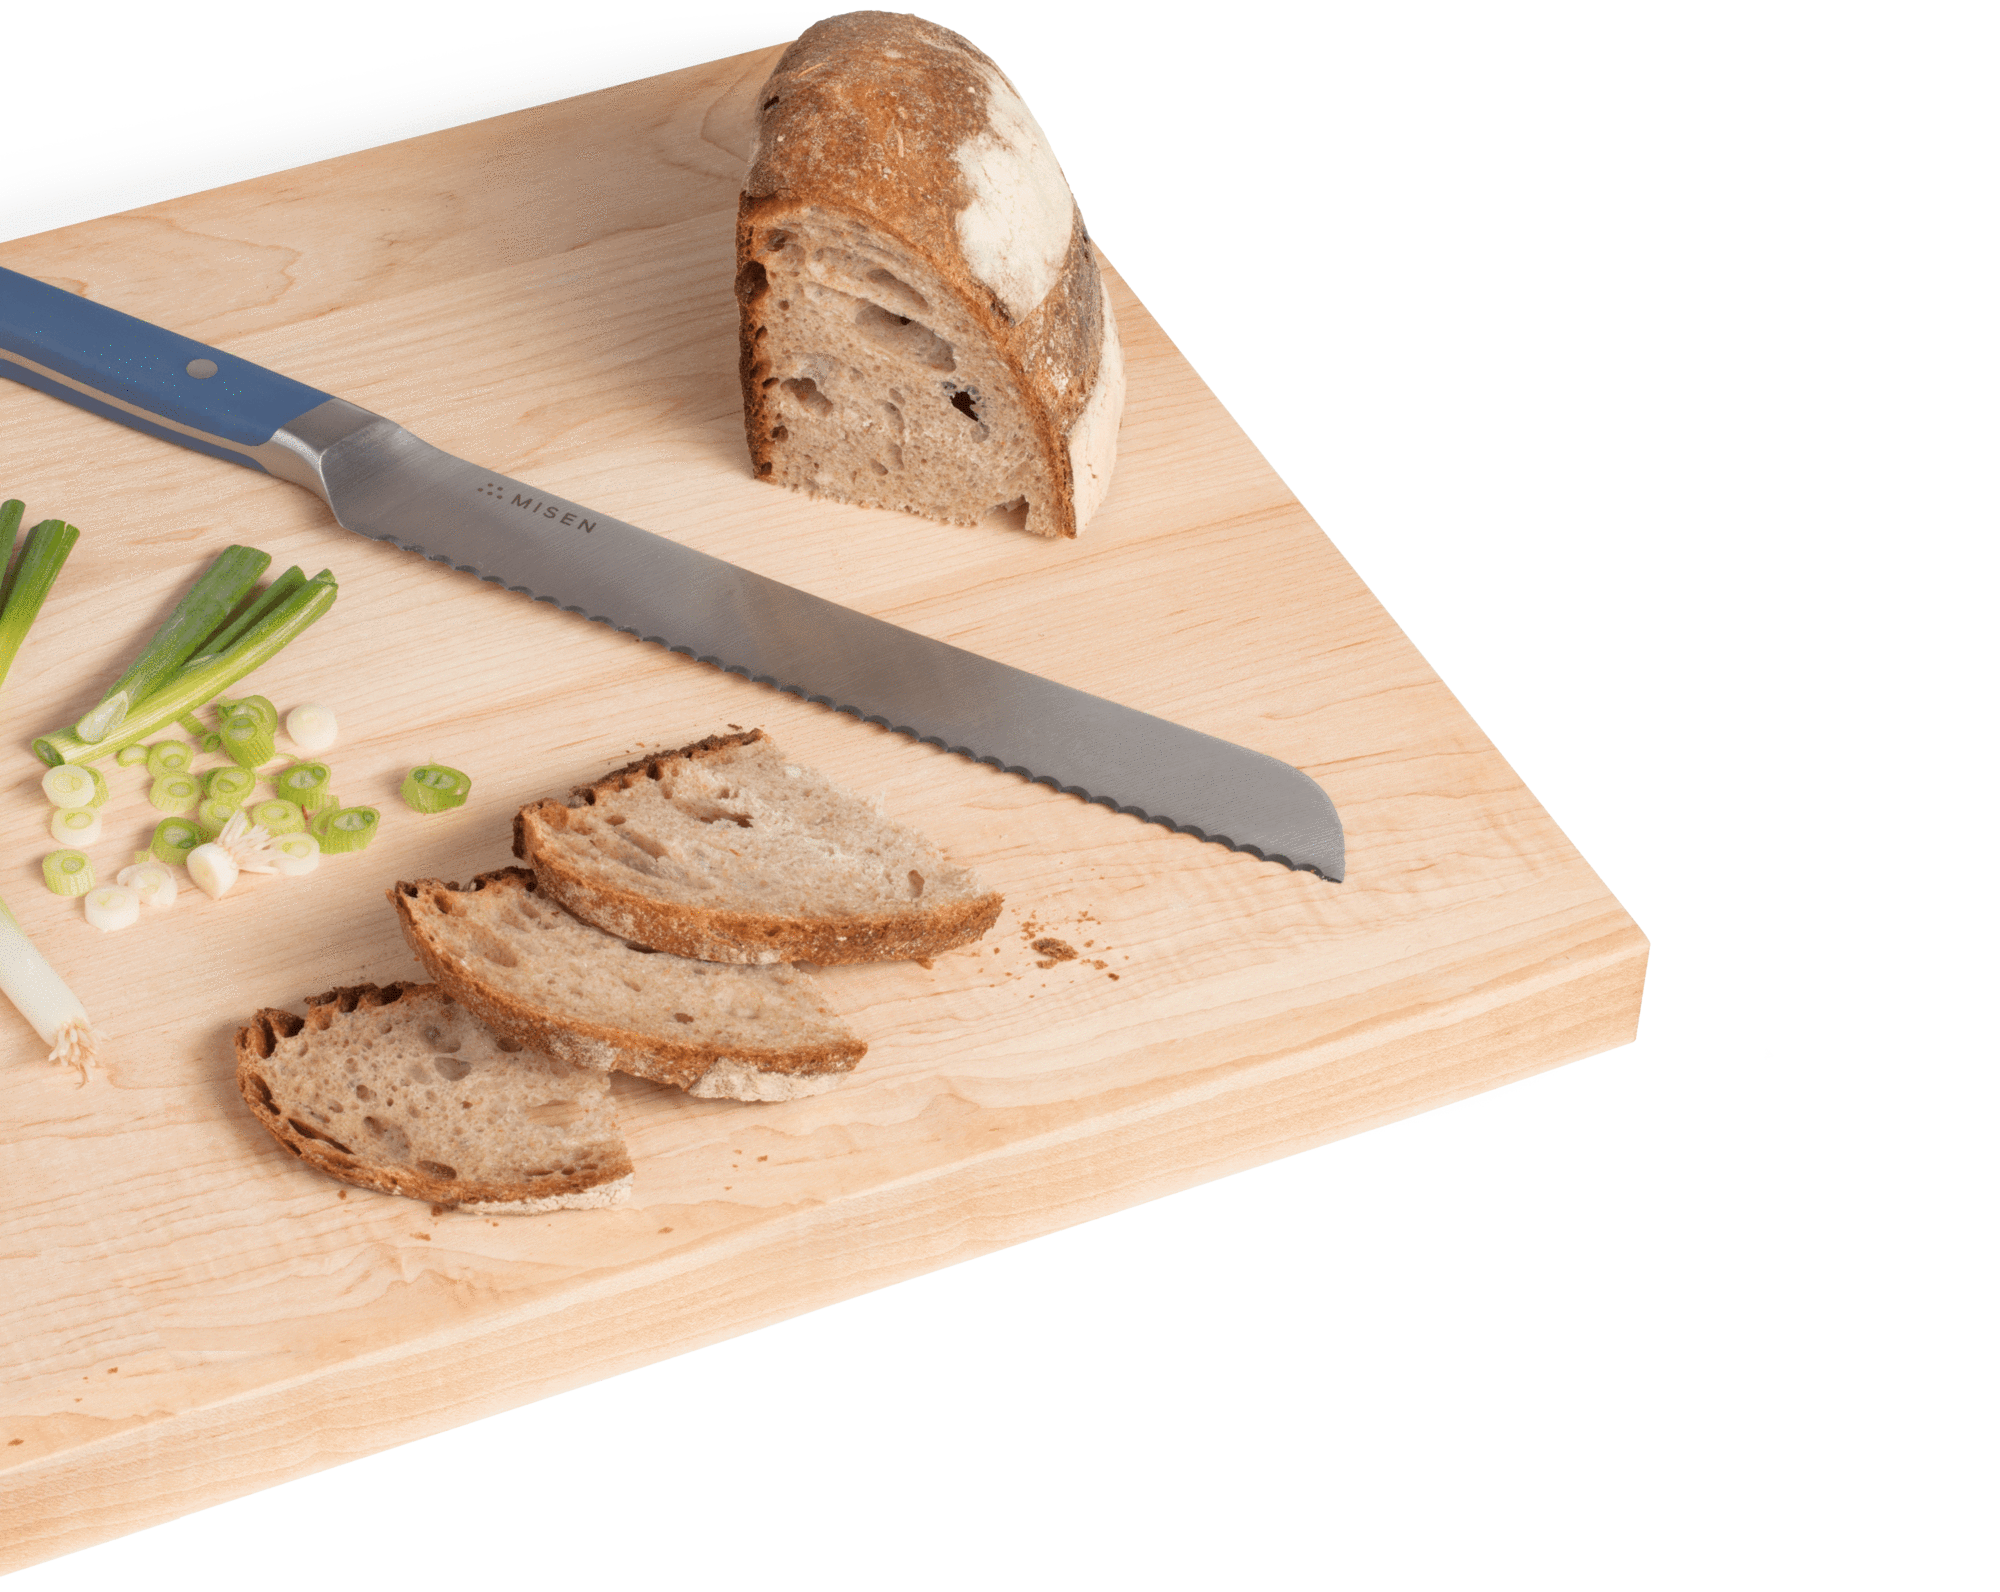 How to sharpen a serrated knife: a serrated knife on a cutting board with sliced bread